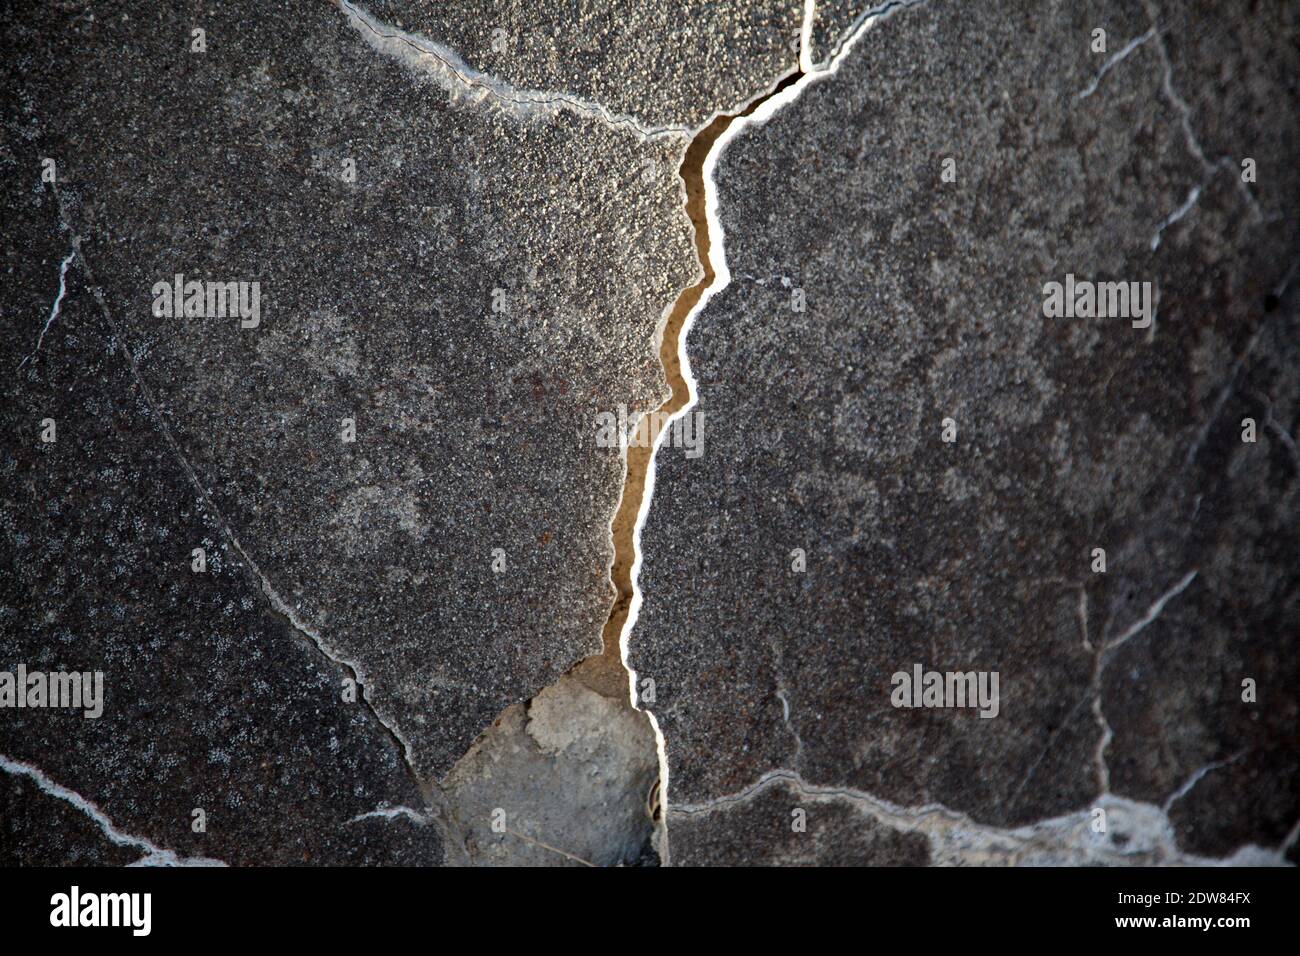 Old wall showing appearence of cracking Stock Photo